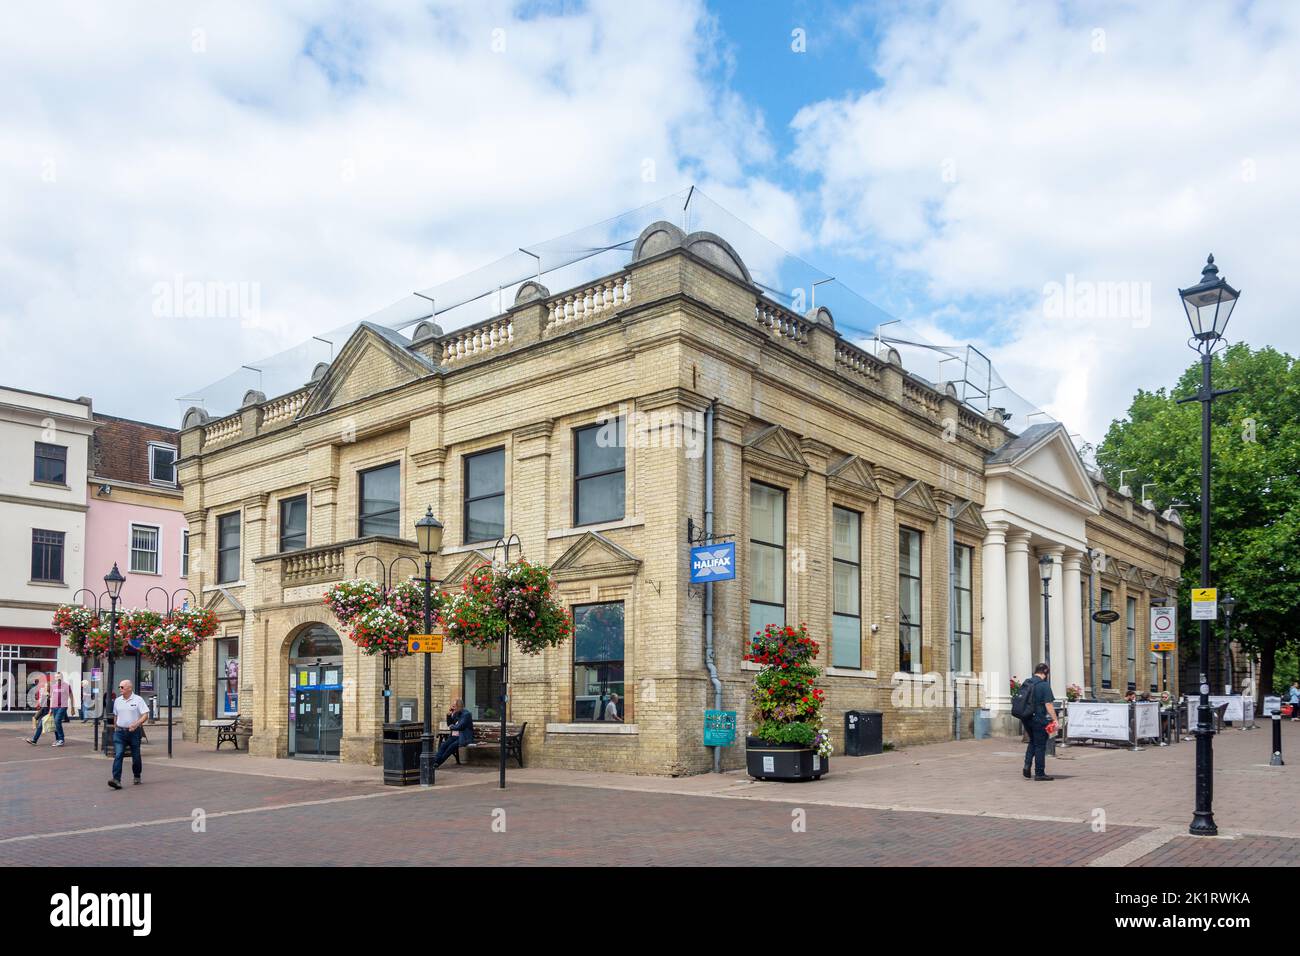 The Old Fire Station building (Halifax Bank), Cornhill, Bury St Edmunds, Suffolk, England, United Kingdom Stock Photo